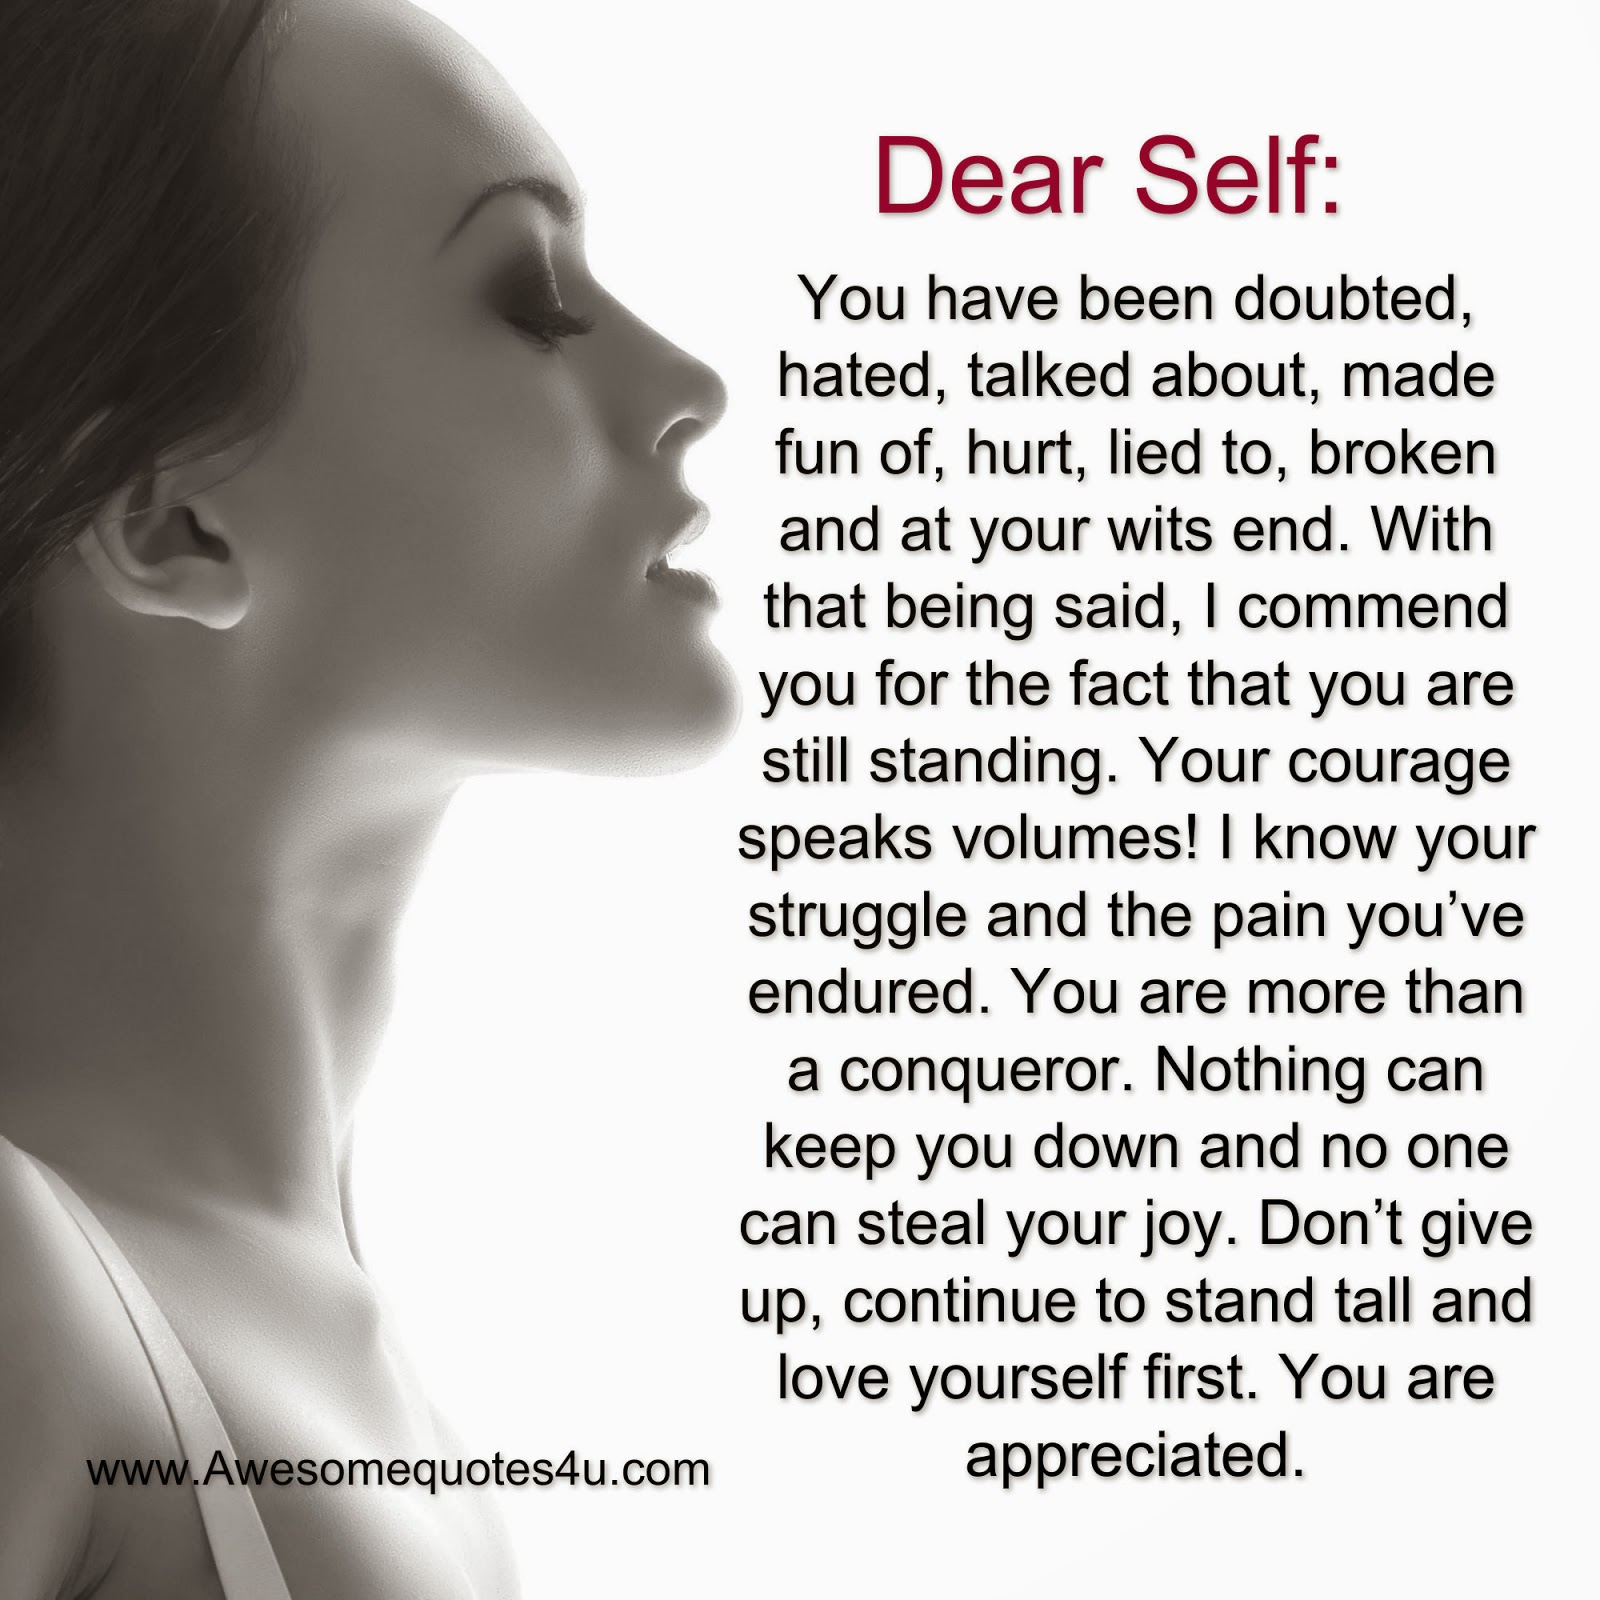 Best Dear Self Quotes of the decade The ultimate guide 